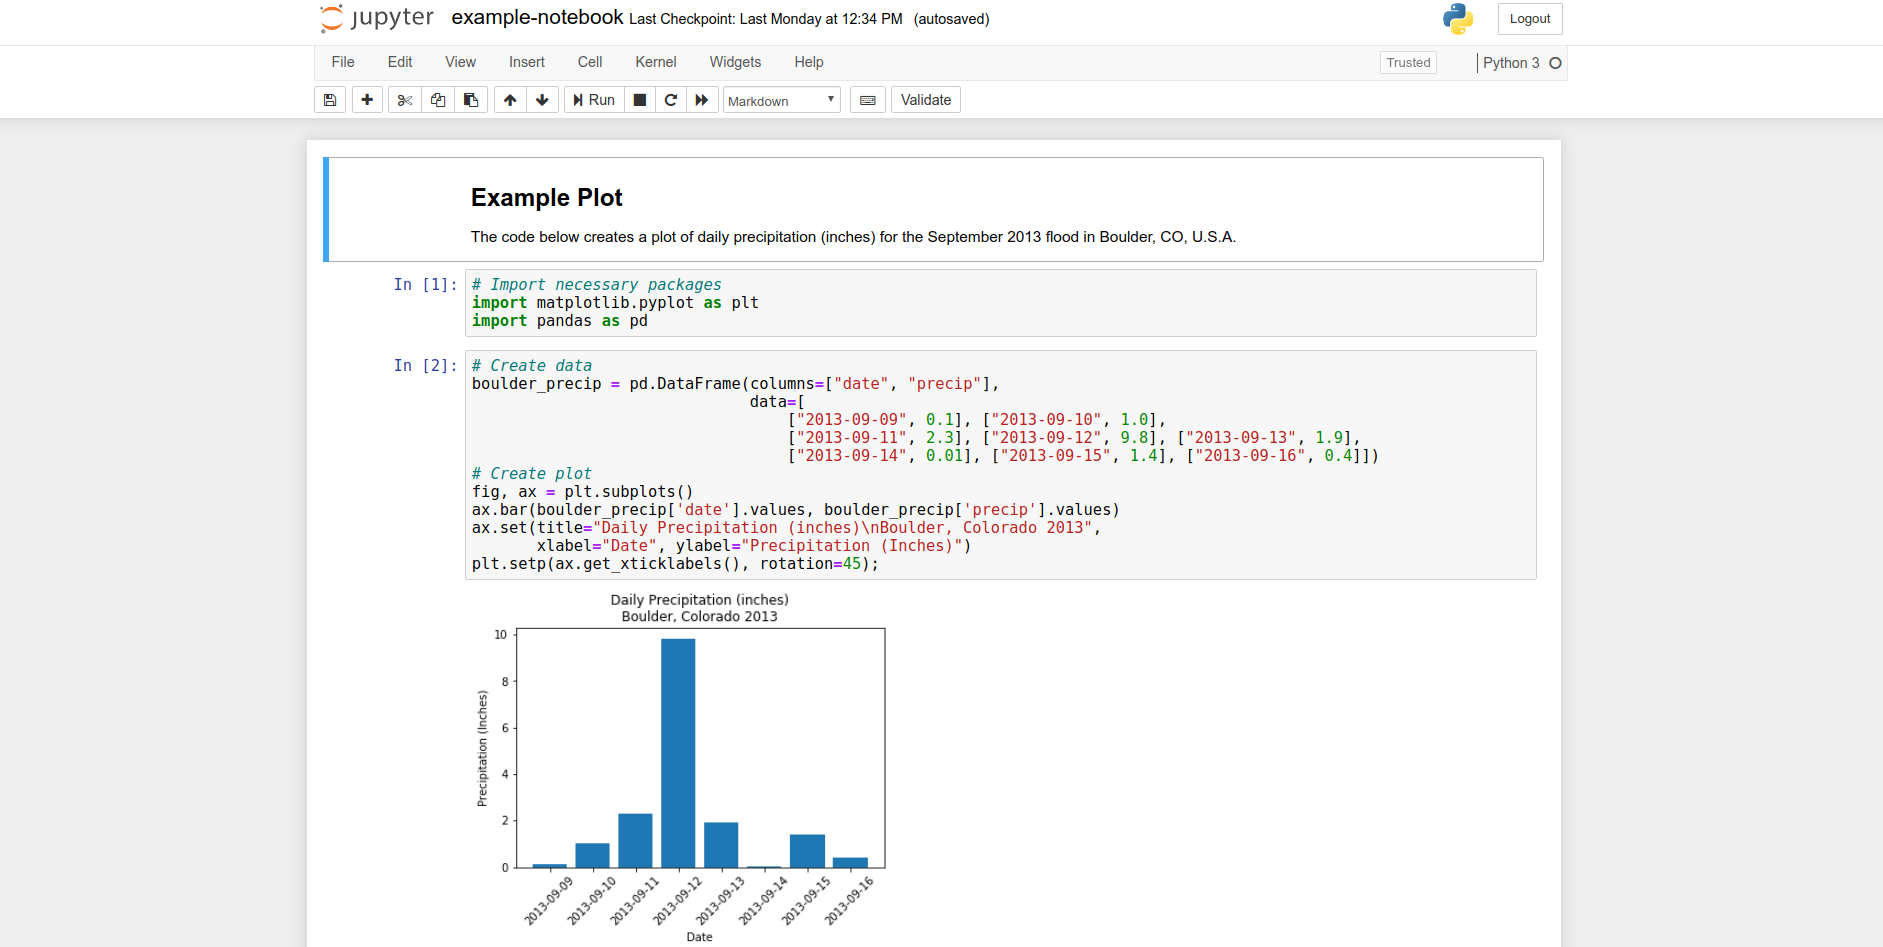 Jupyter Notebook (left) is a browser-based interface that allows you to write code in many programming languages, including Python, and add formatted text that describes what the code does using Markdown.